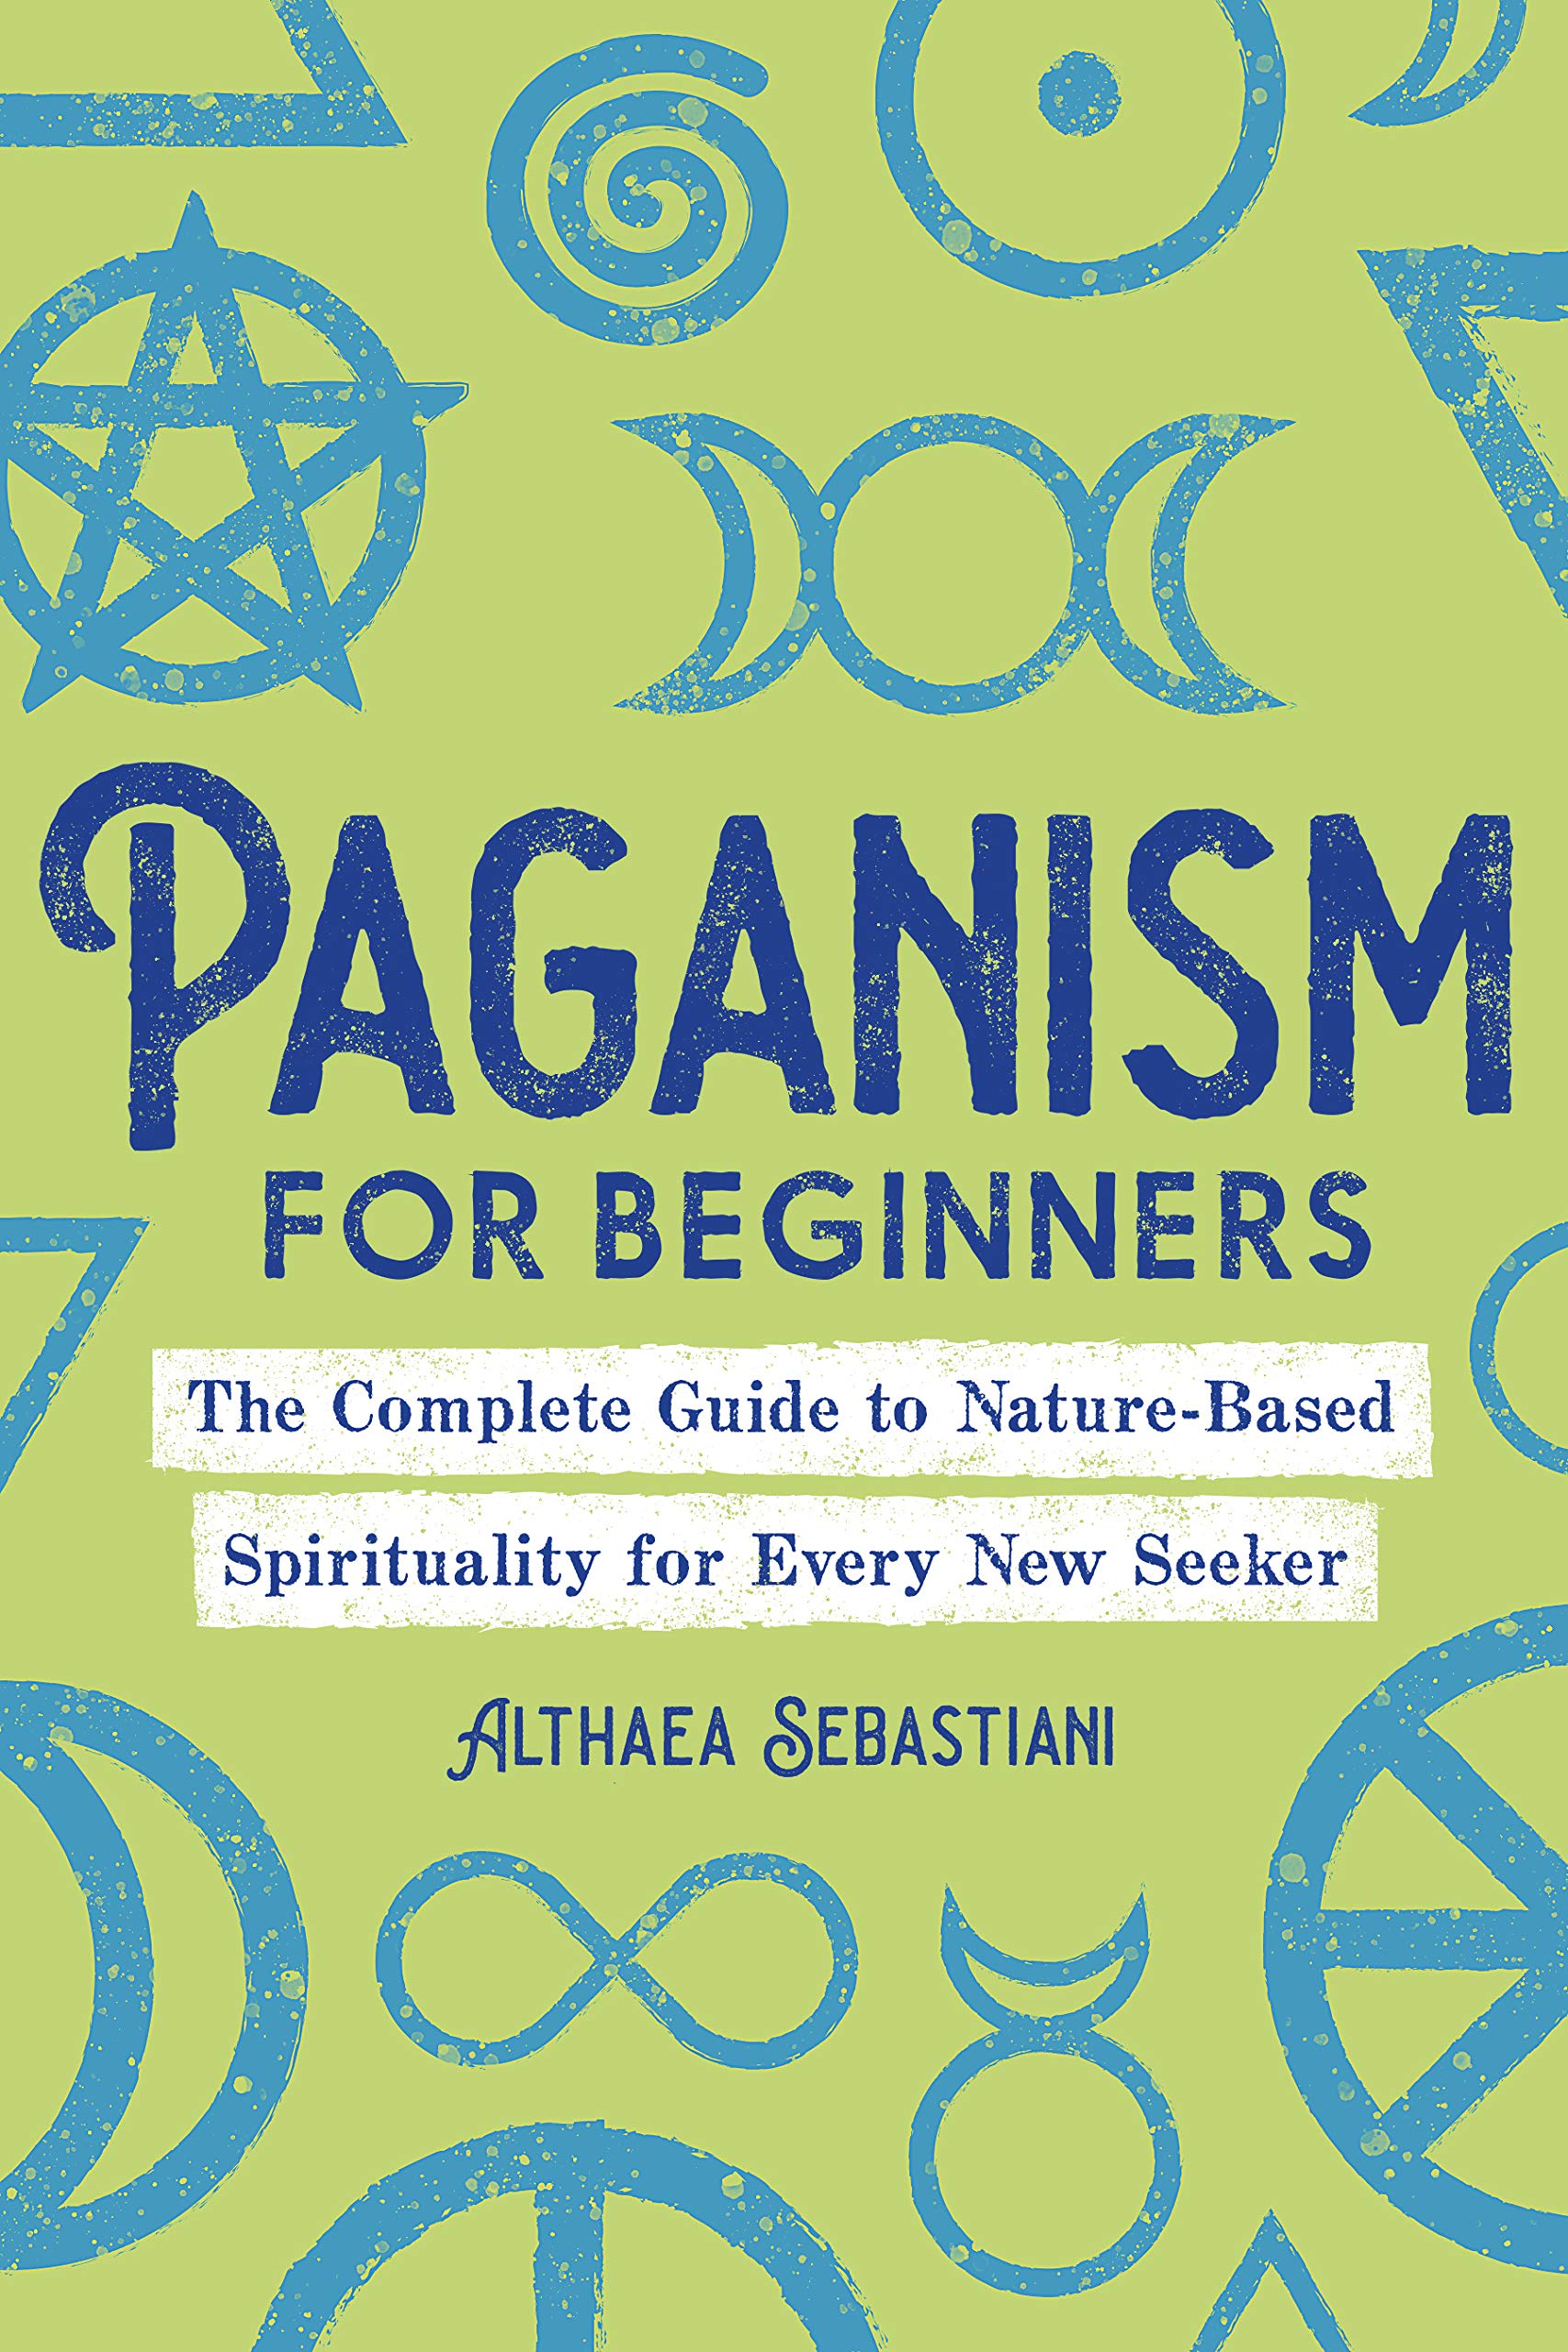 Paganism for Beginners: The Complete Guide